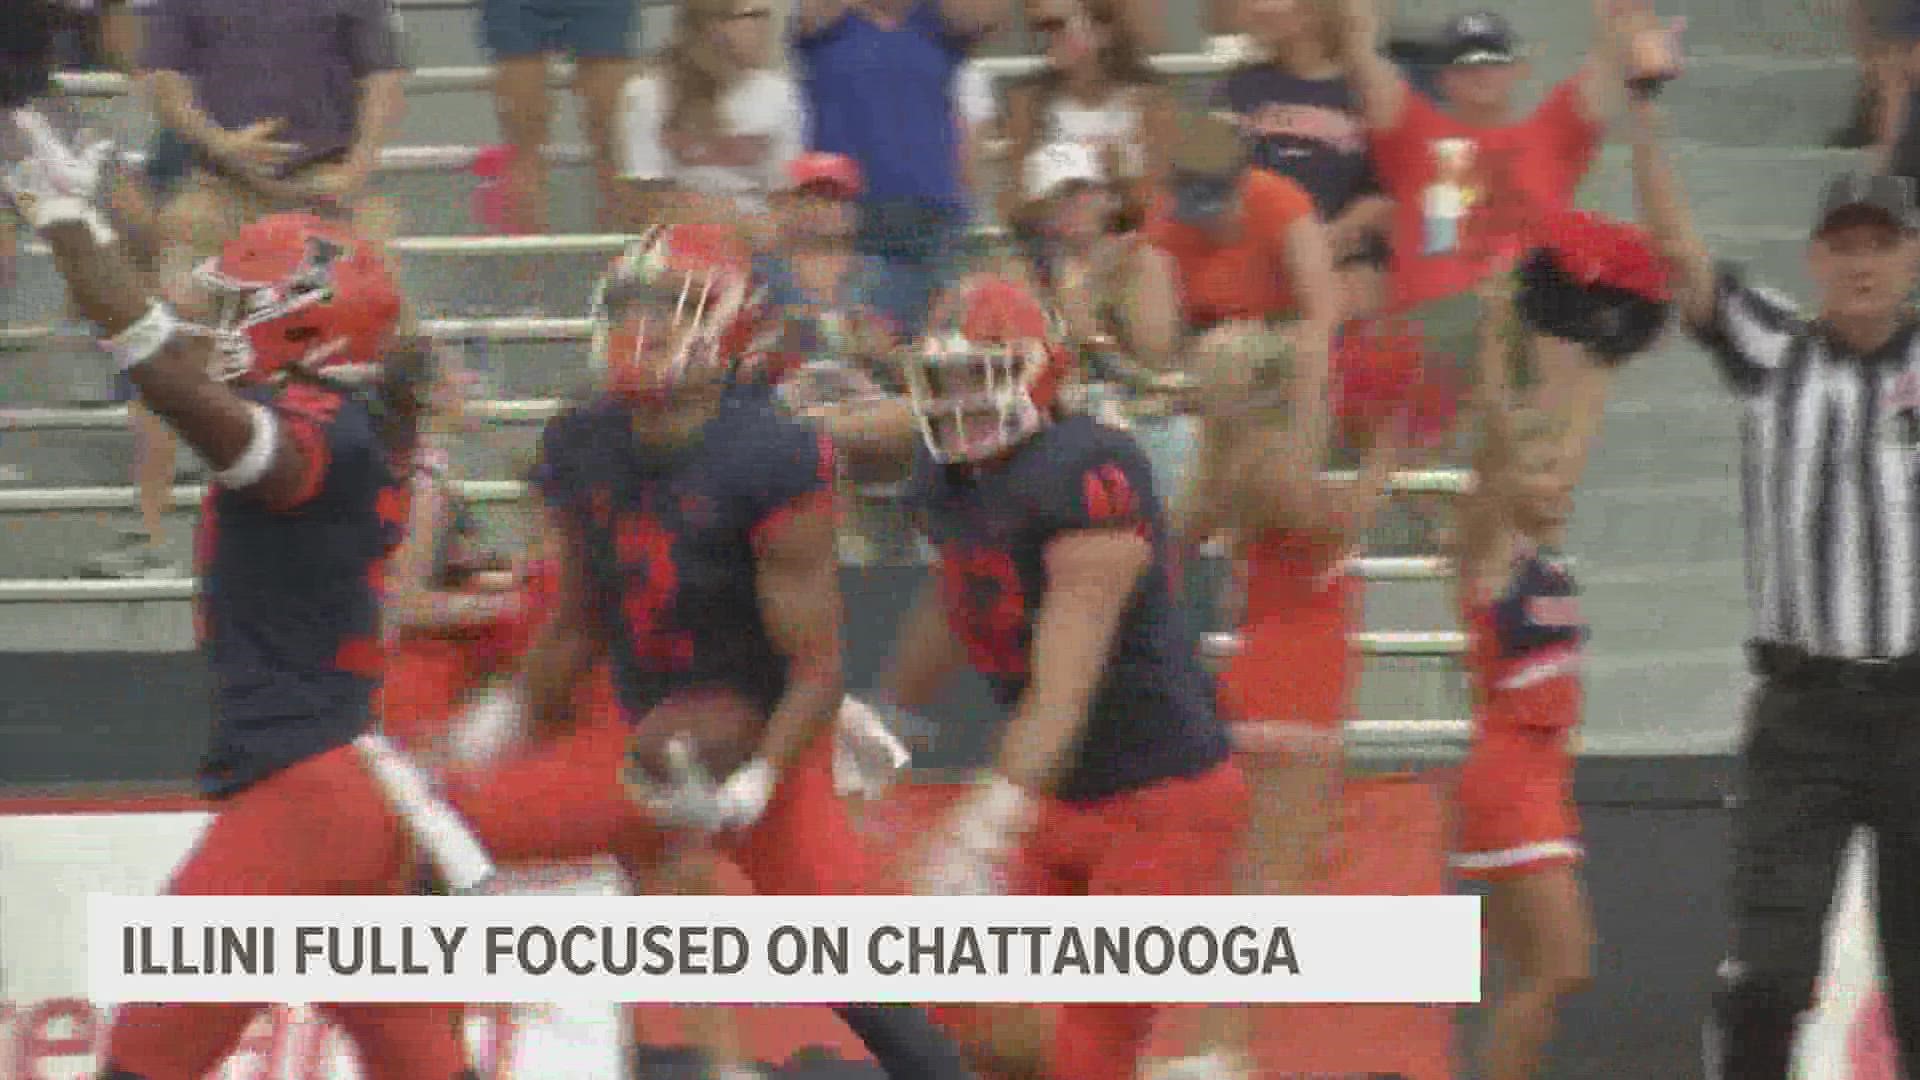 Coming back from the bye week, the Illini are taking a break from conference play to take on the undefeated Chattanooga.